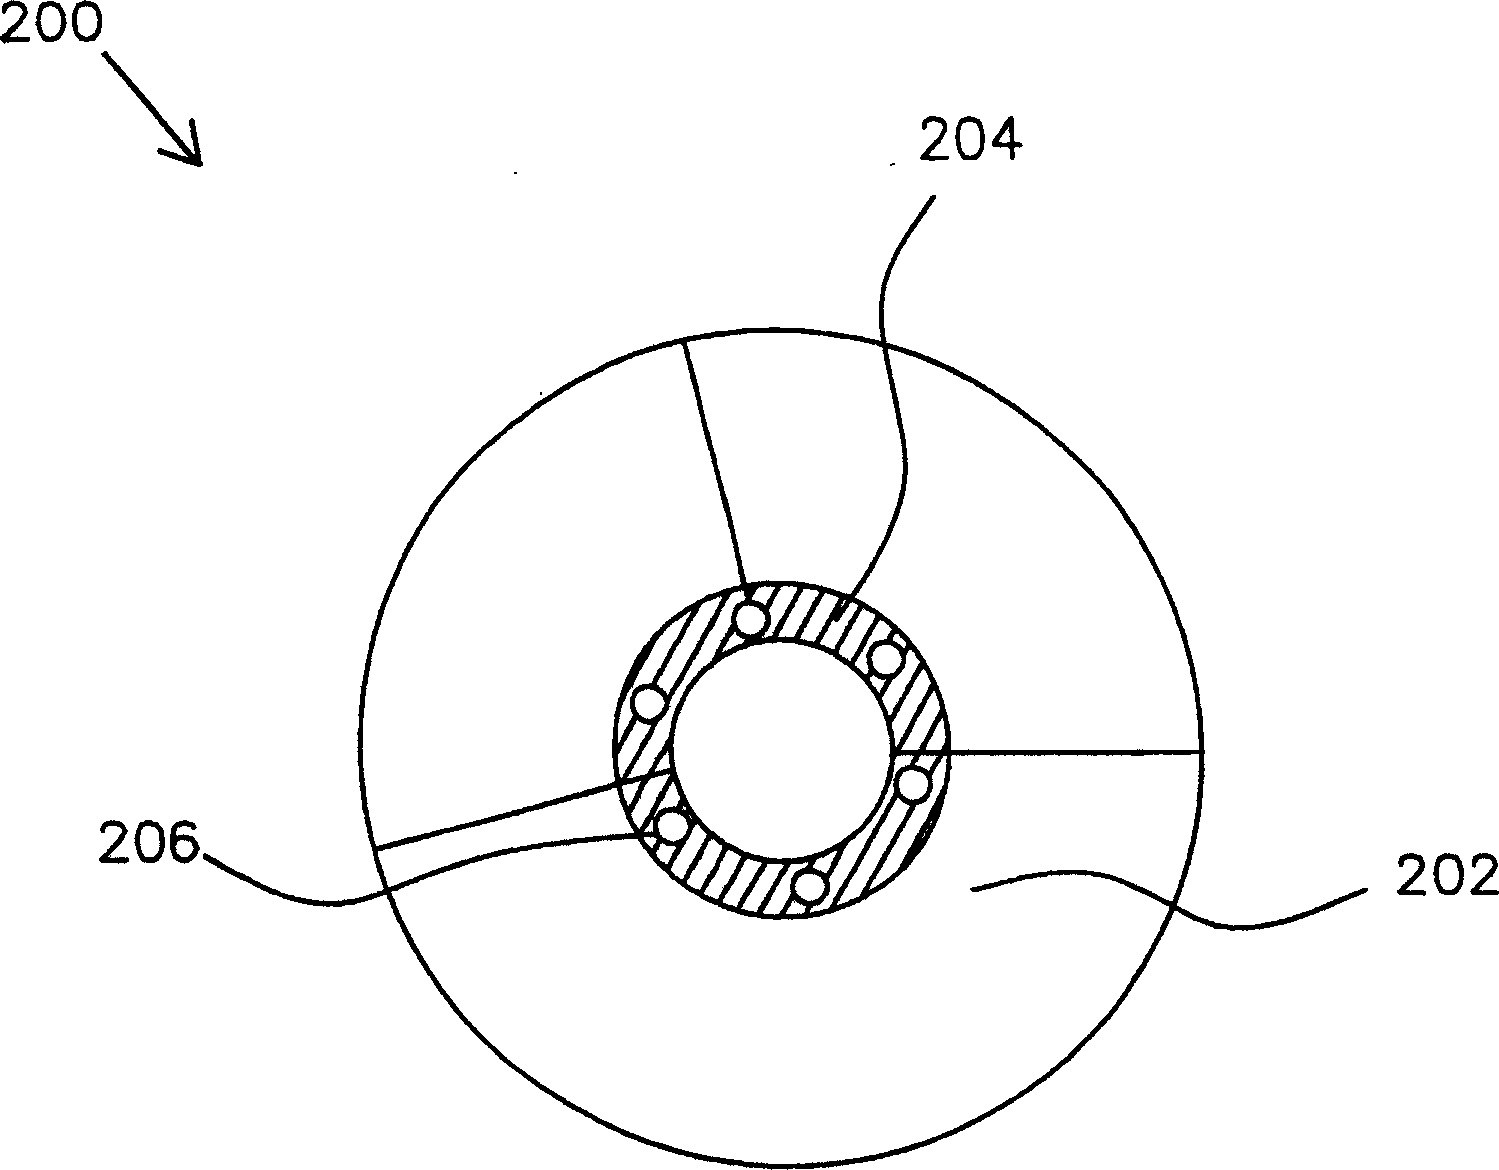 Filter, color wheel therewith and producing method thereof